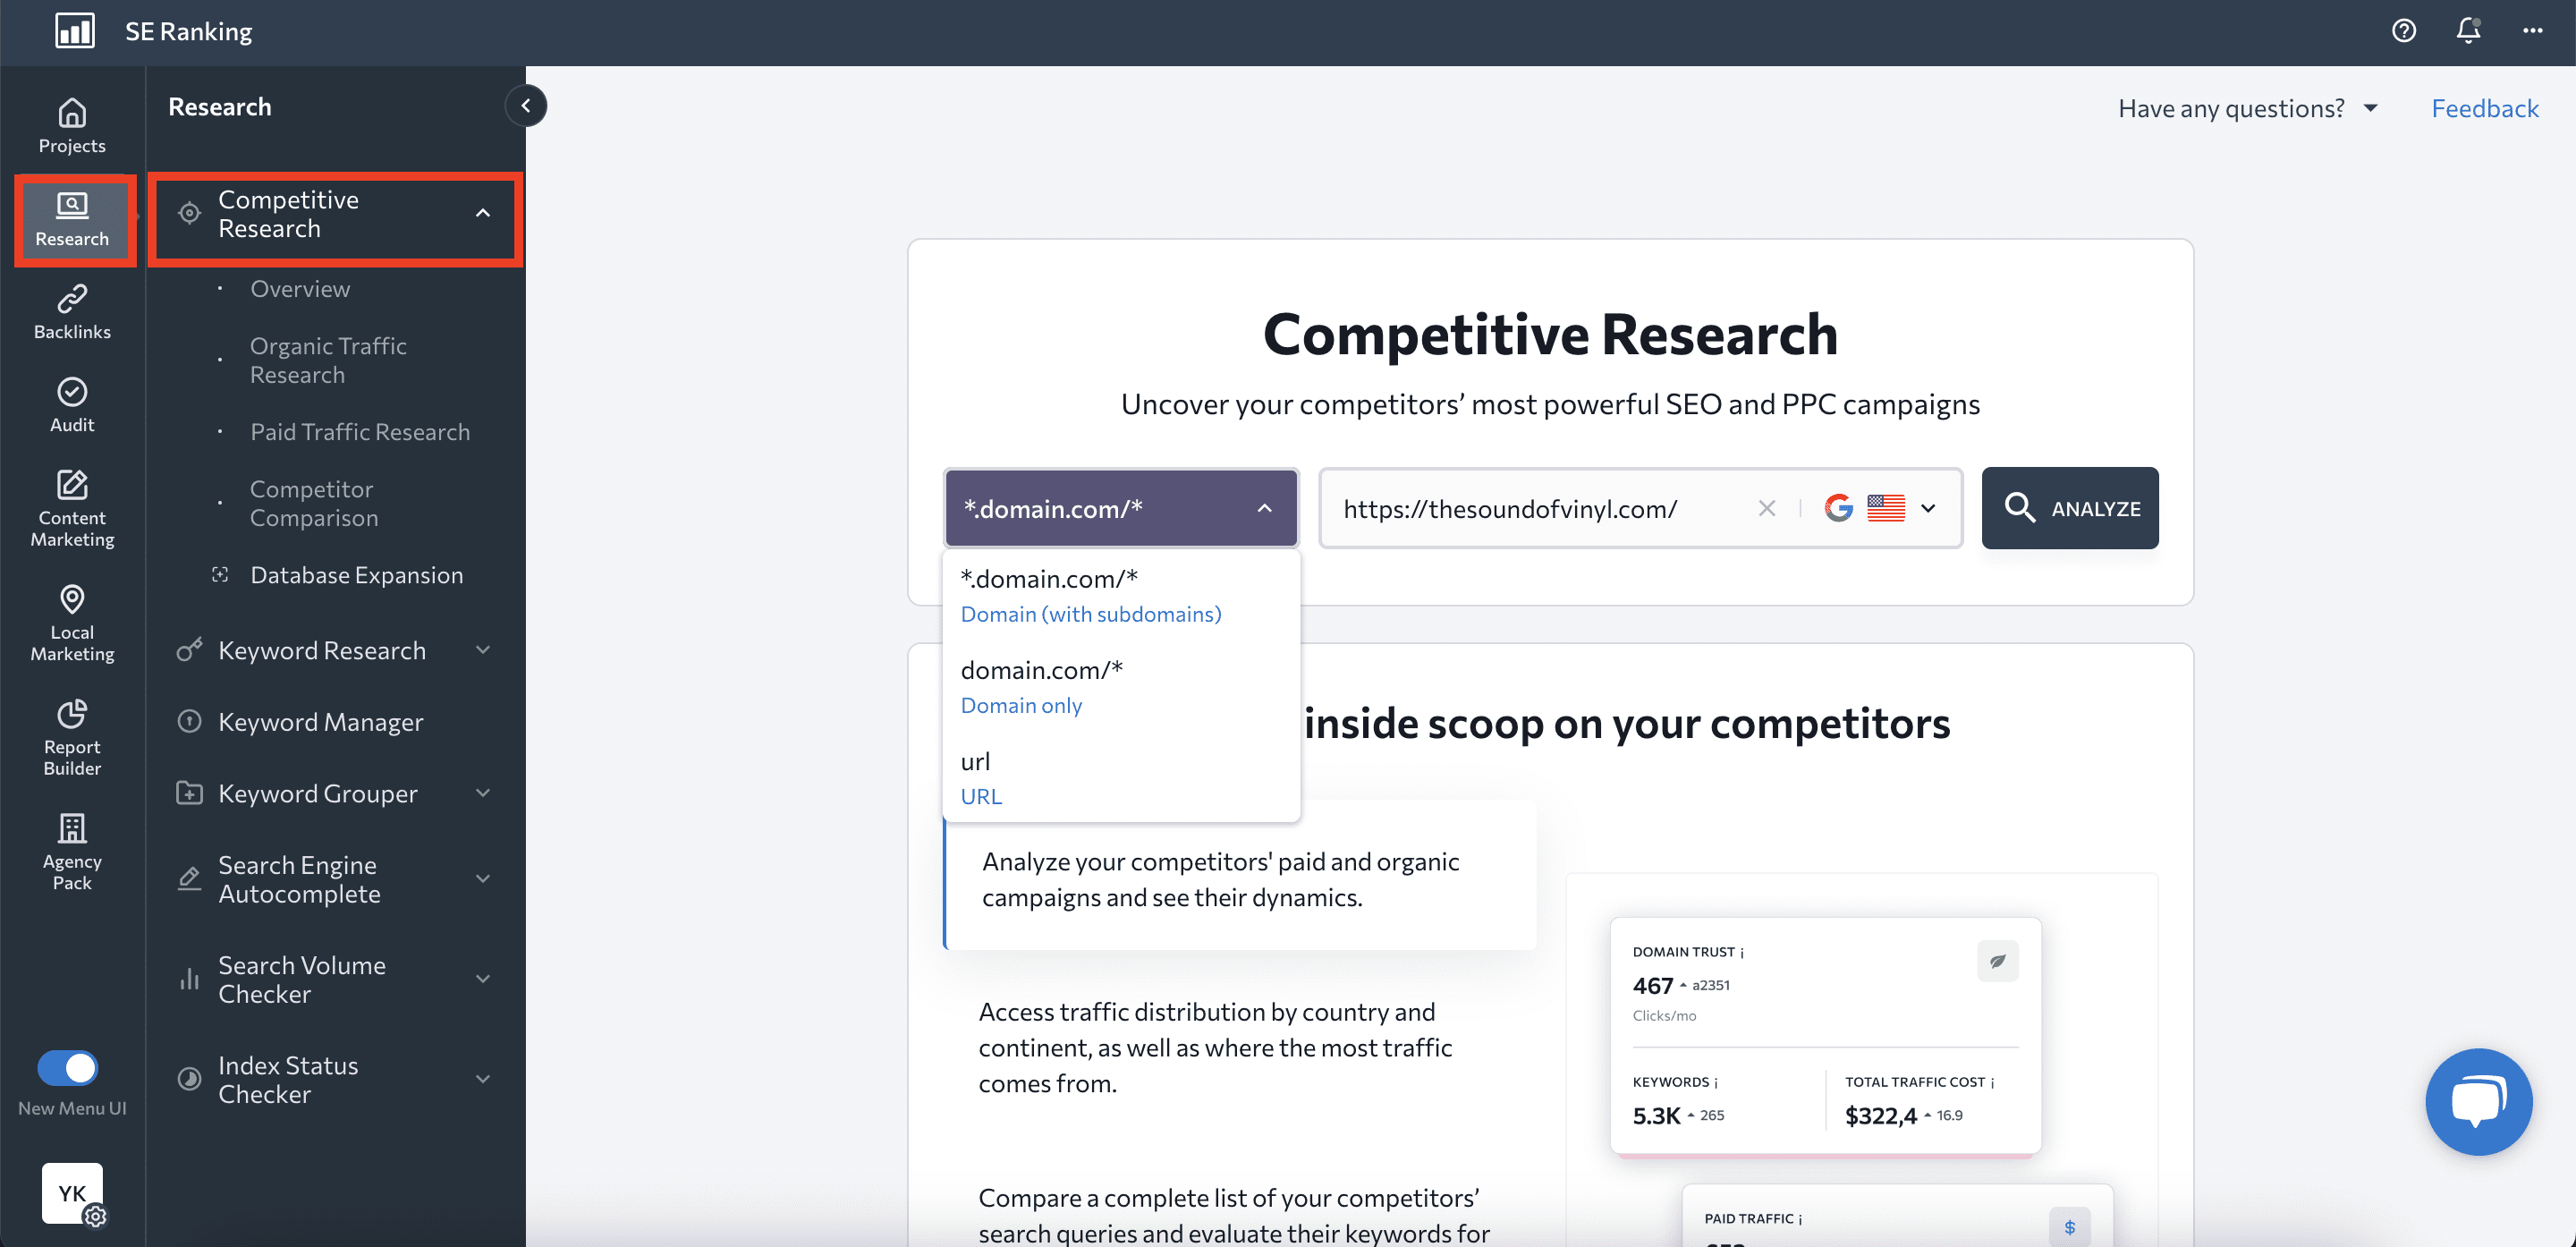 Input information for competitive research